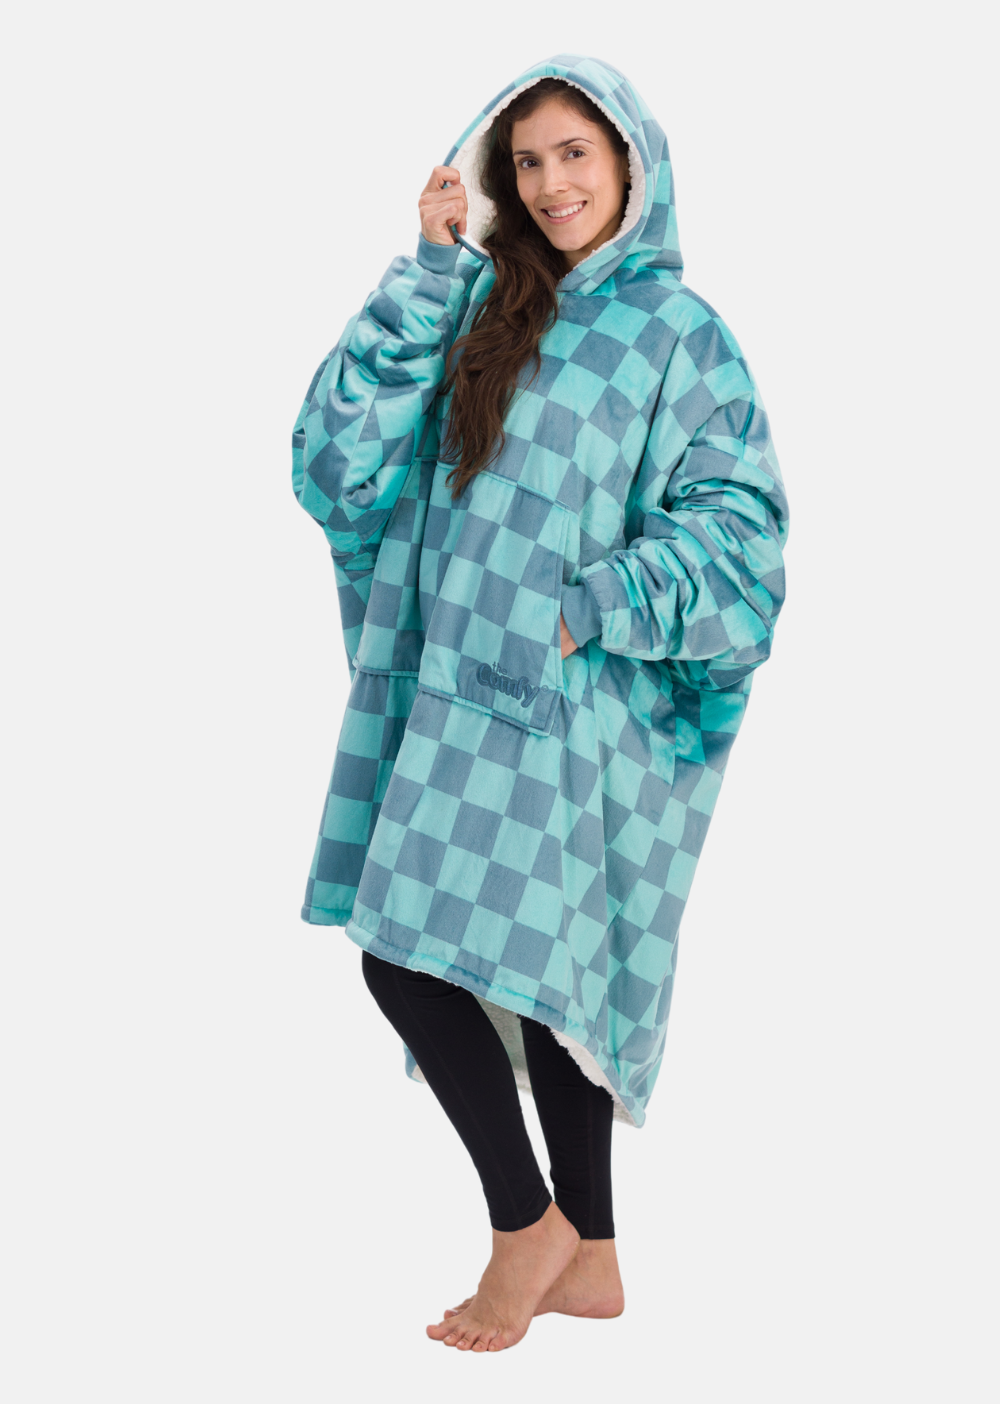 teal checkered